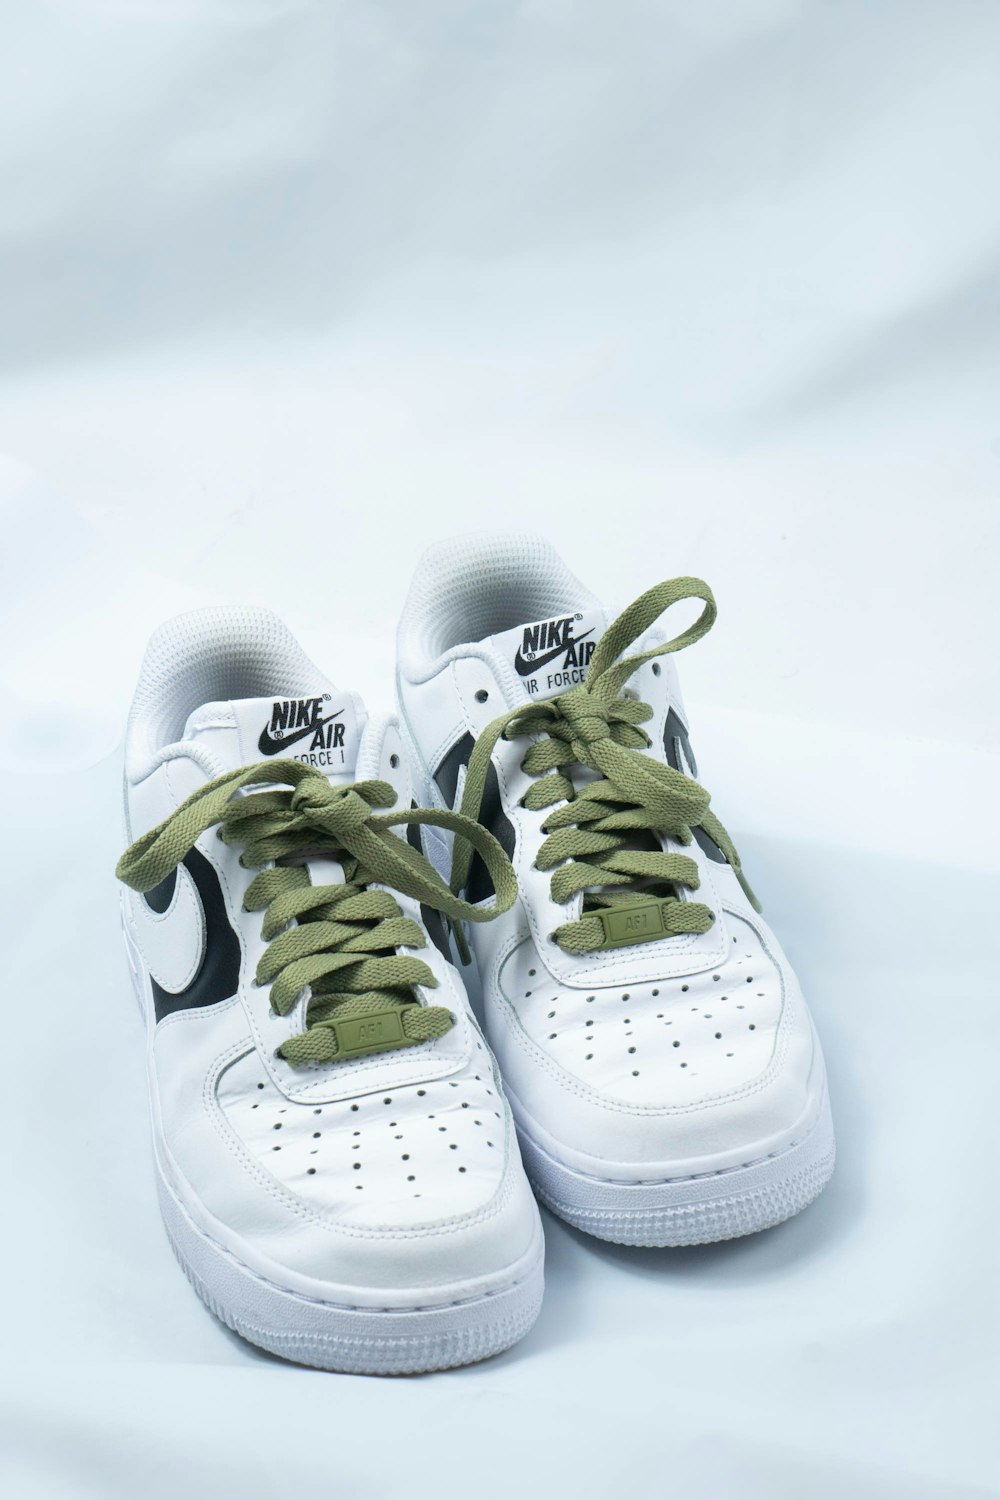 white and green nike athletic shoes